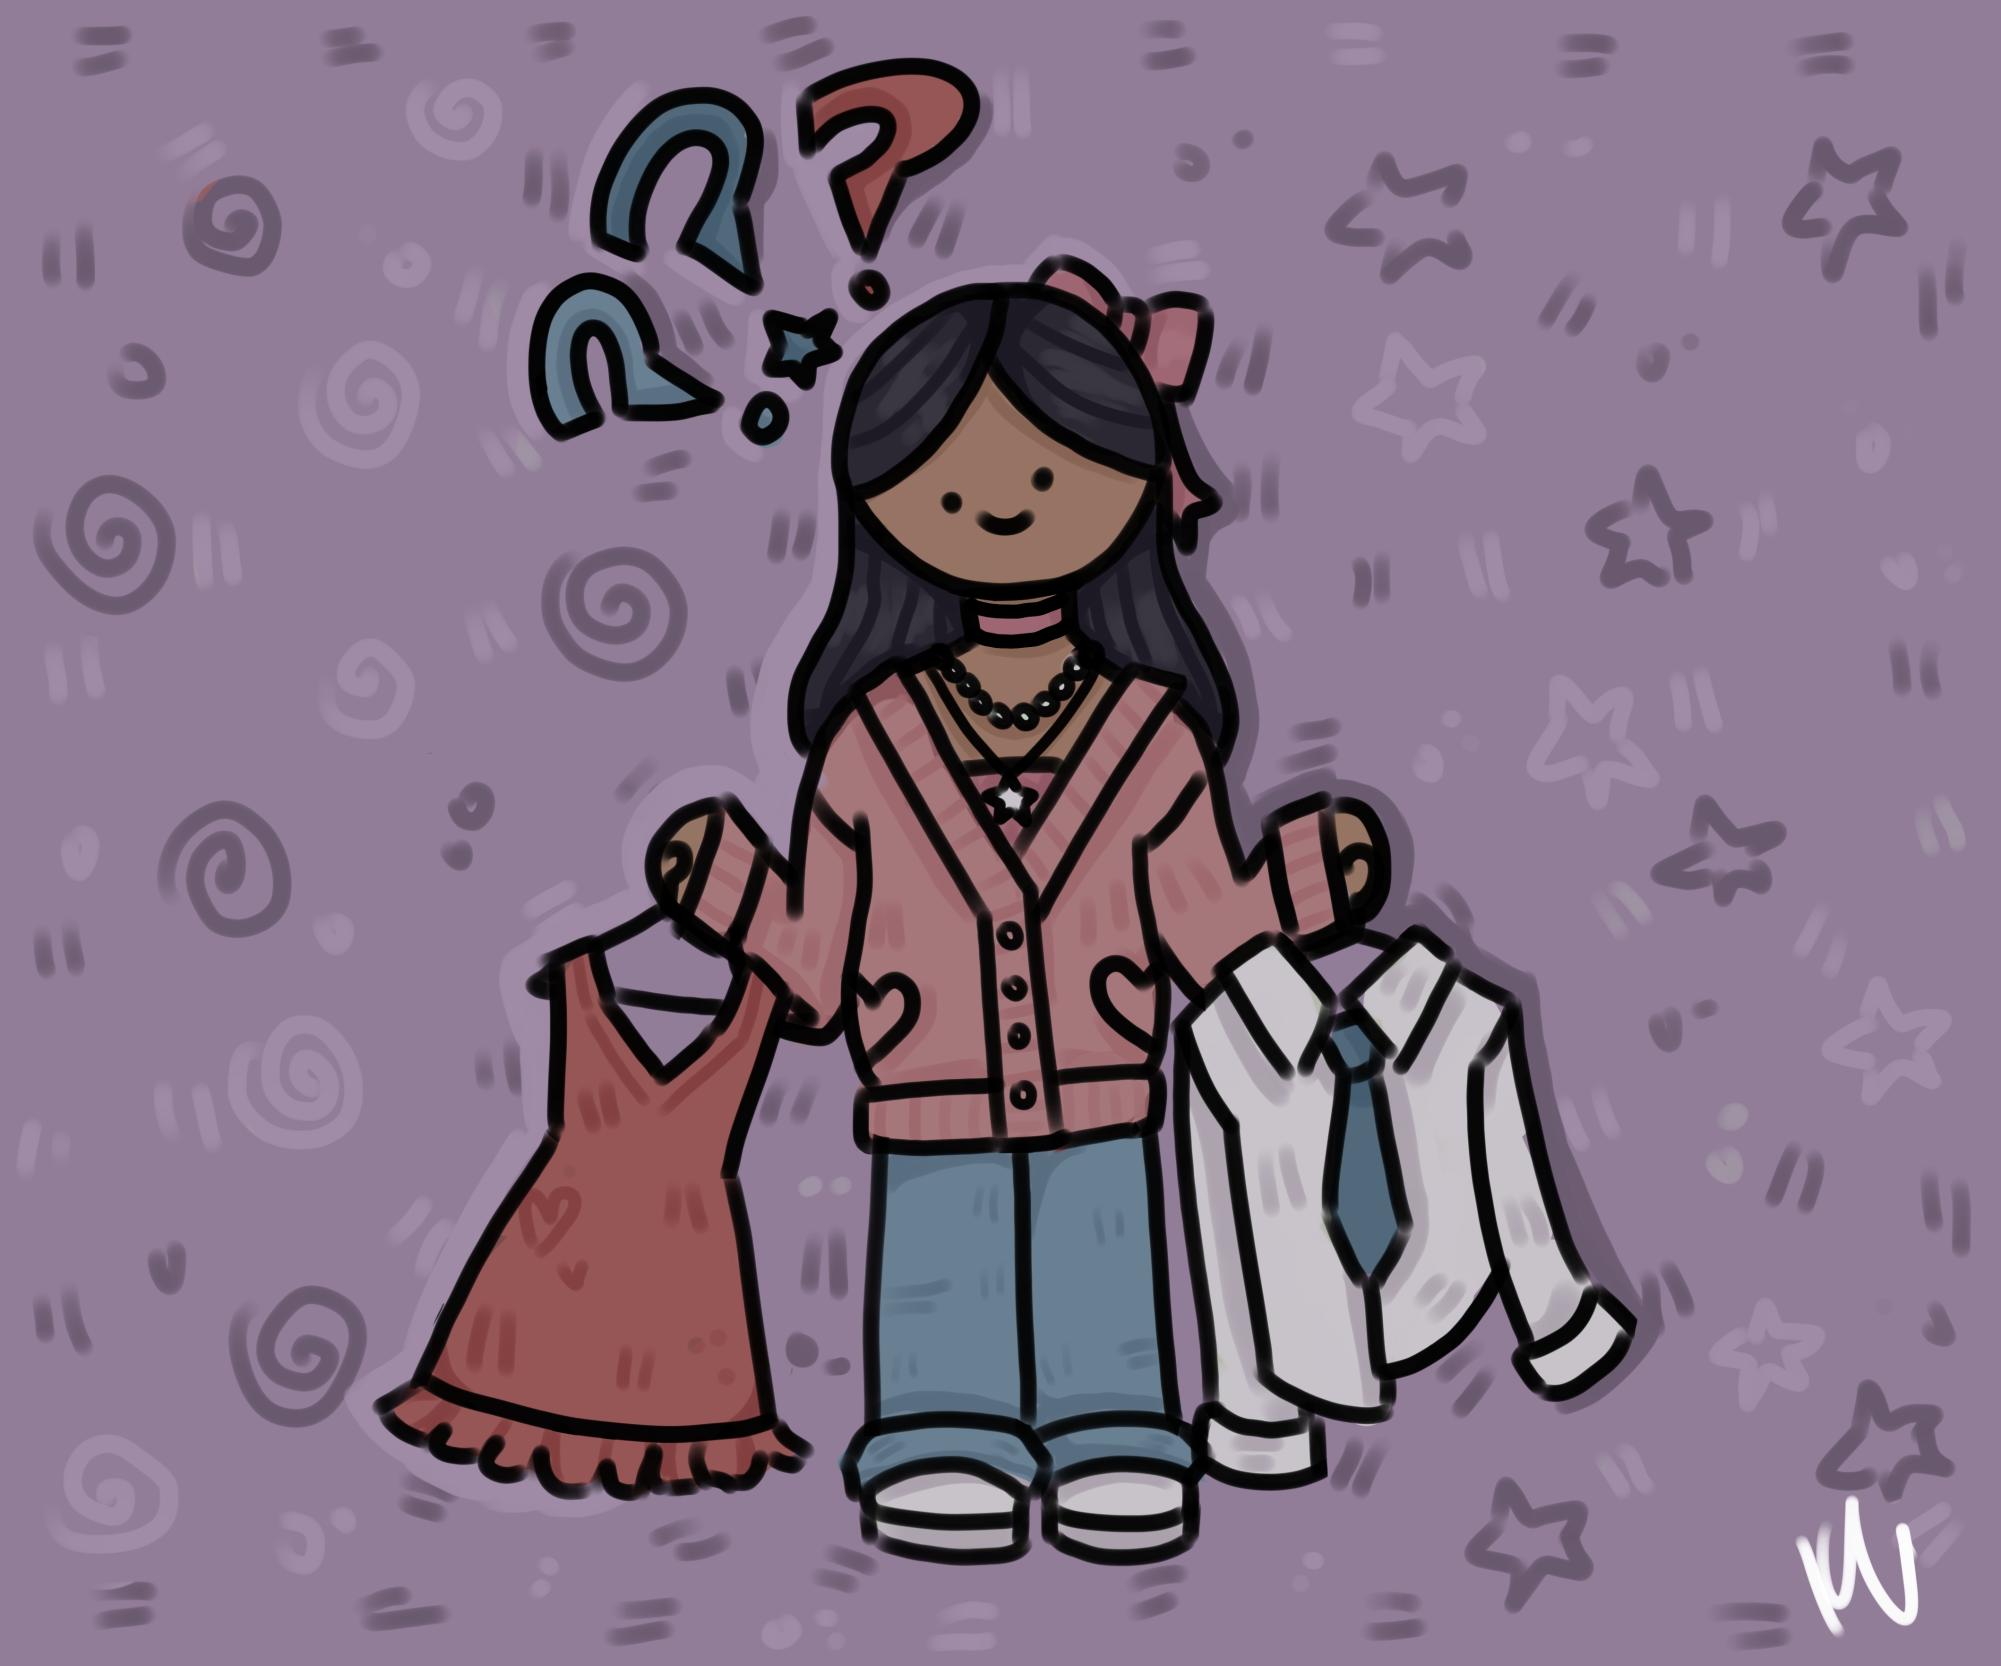 The ability to dress freely encourages self expression and exploration. The Sidekick staff writer Rhea Choudhary delves into the limitations and negative side effects school uniforms present.